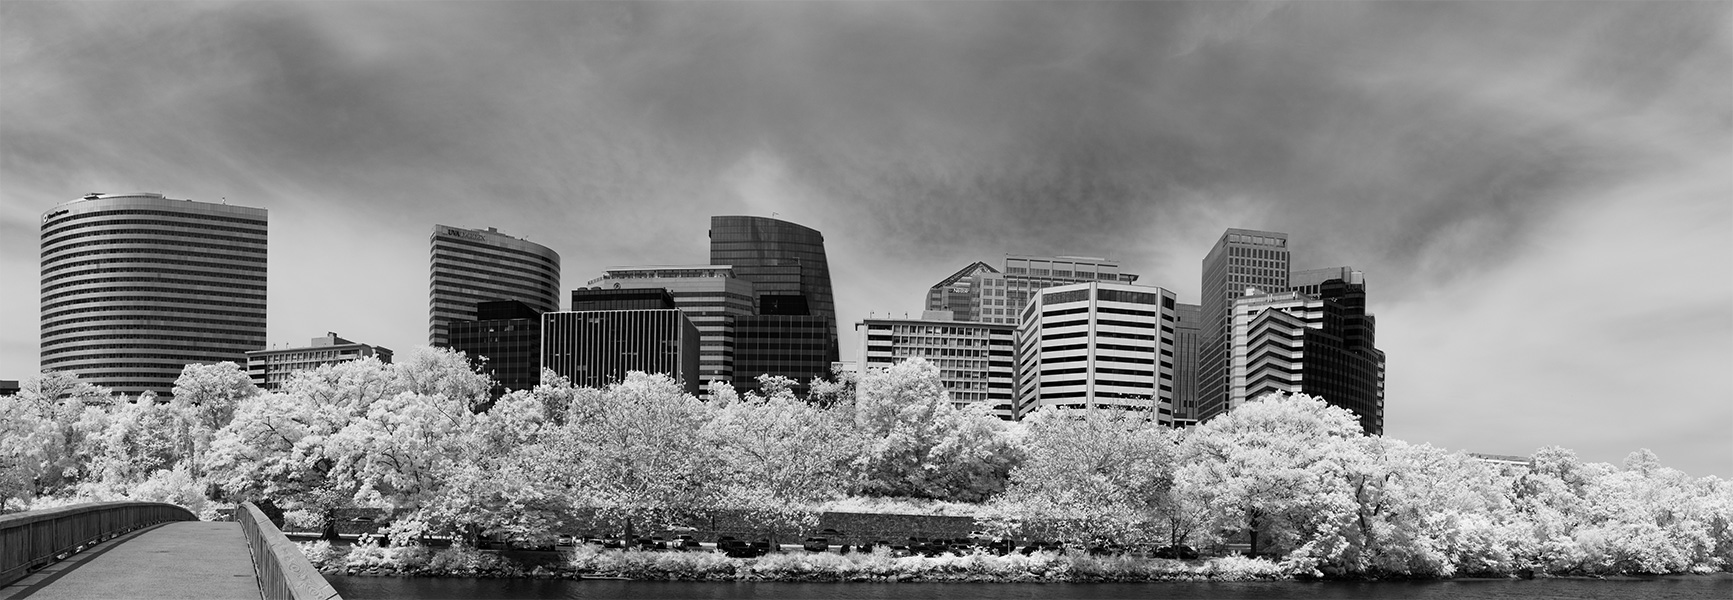 Infrared Panorama of a Cluster of Modern Office Buildings.